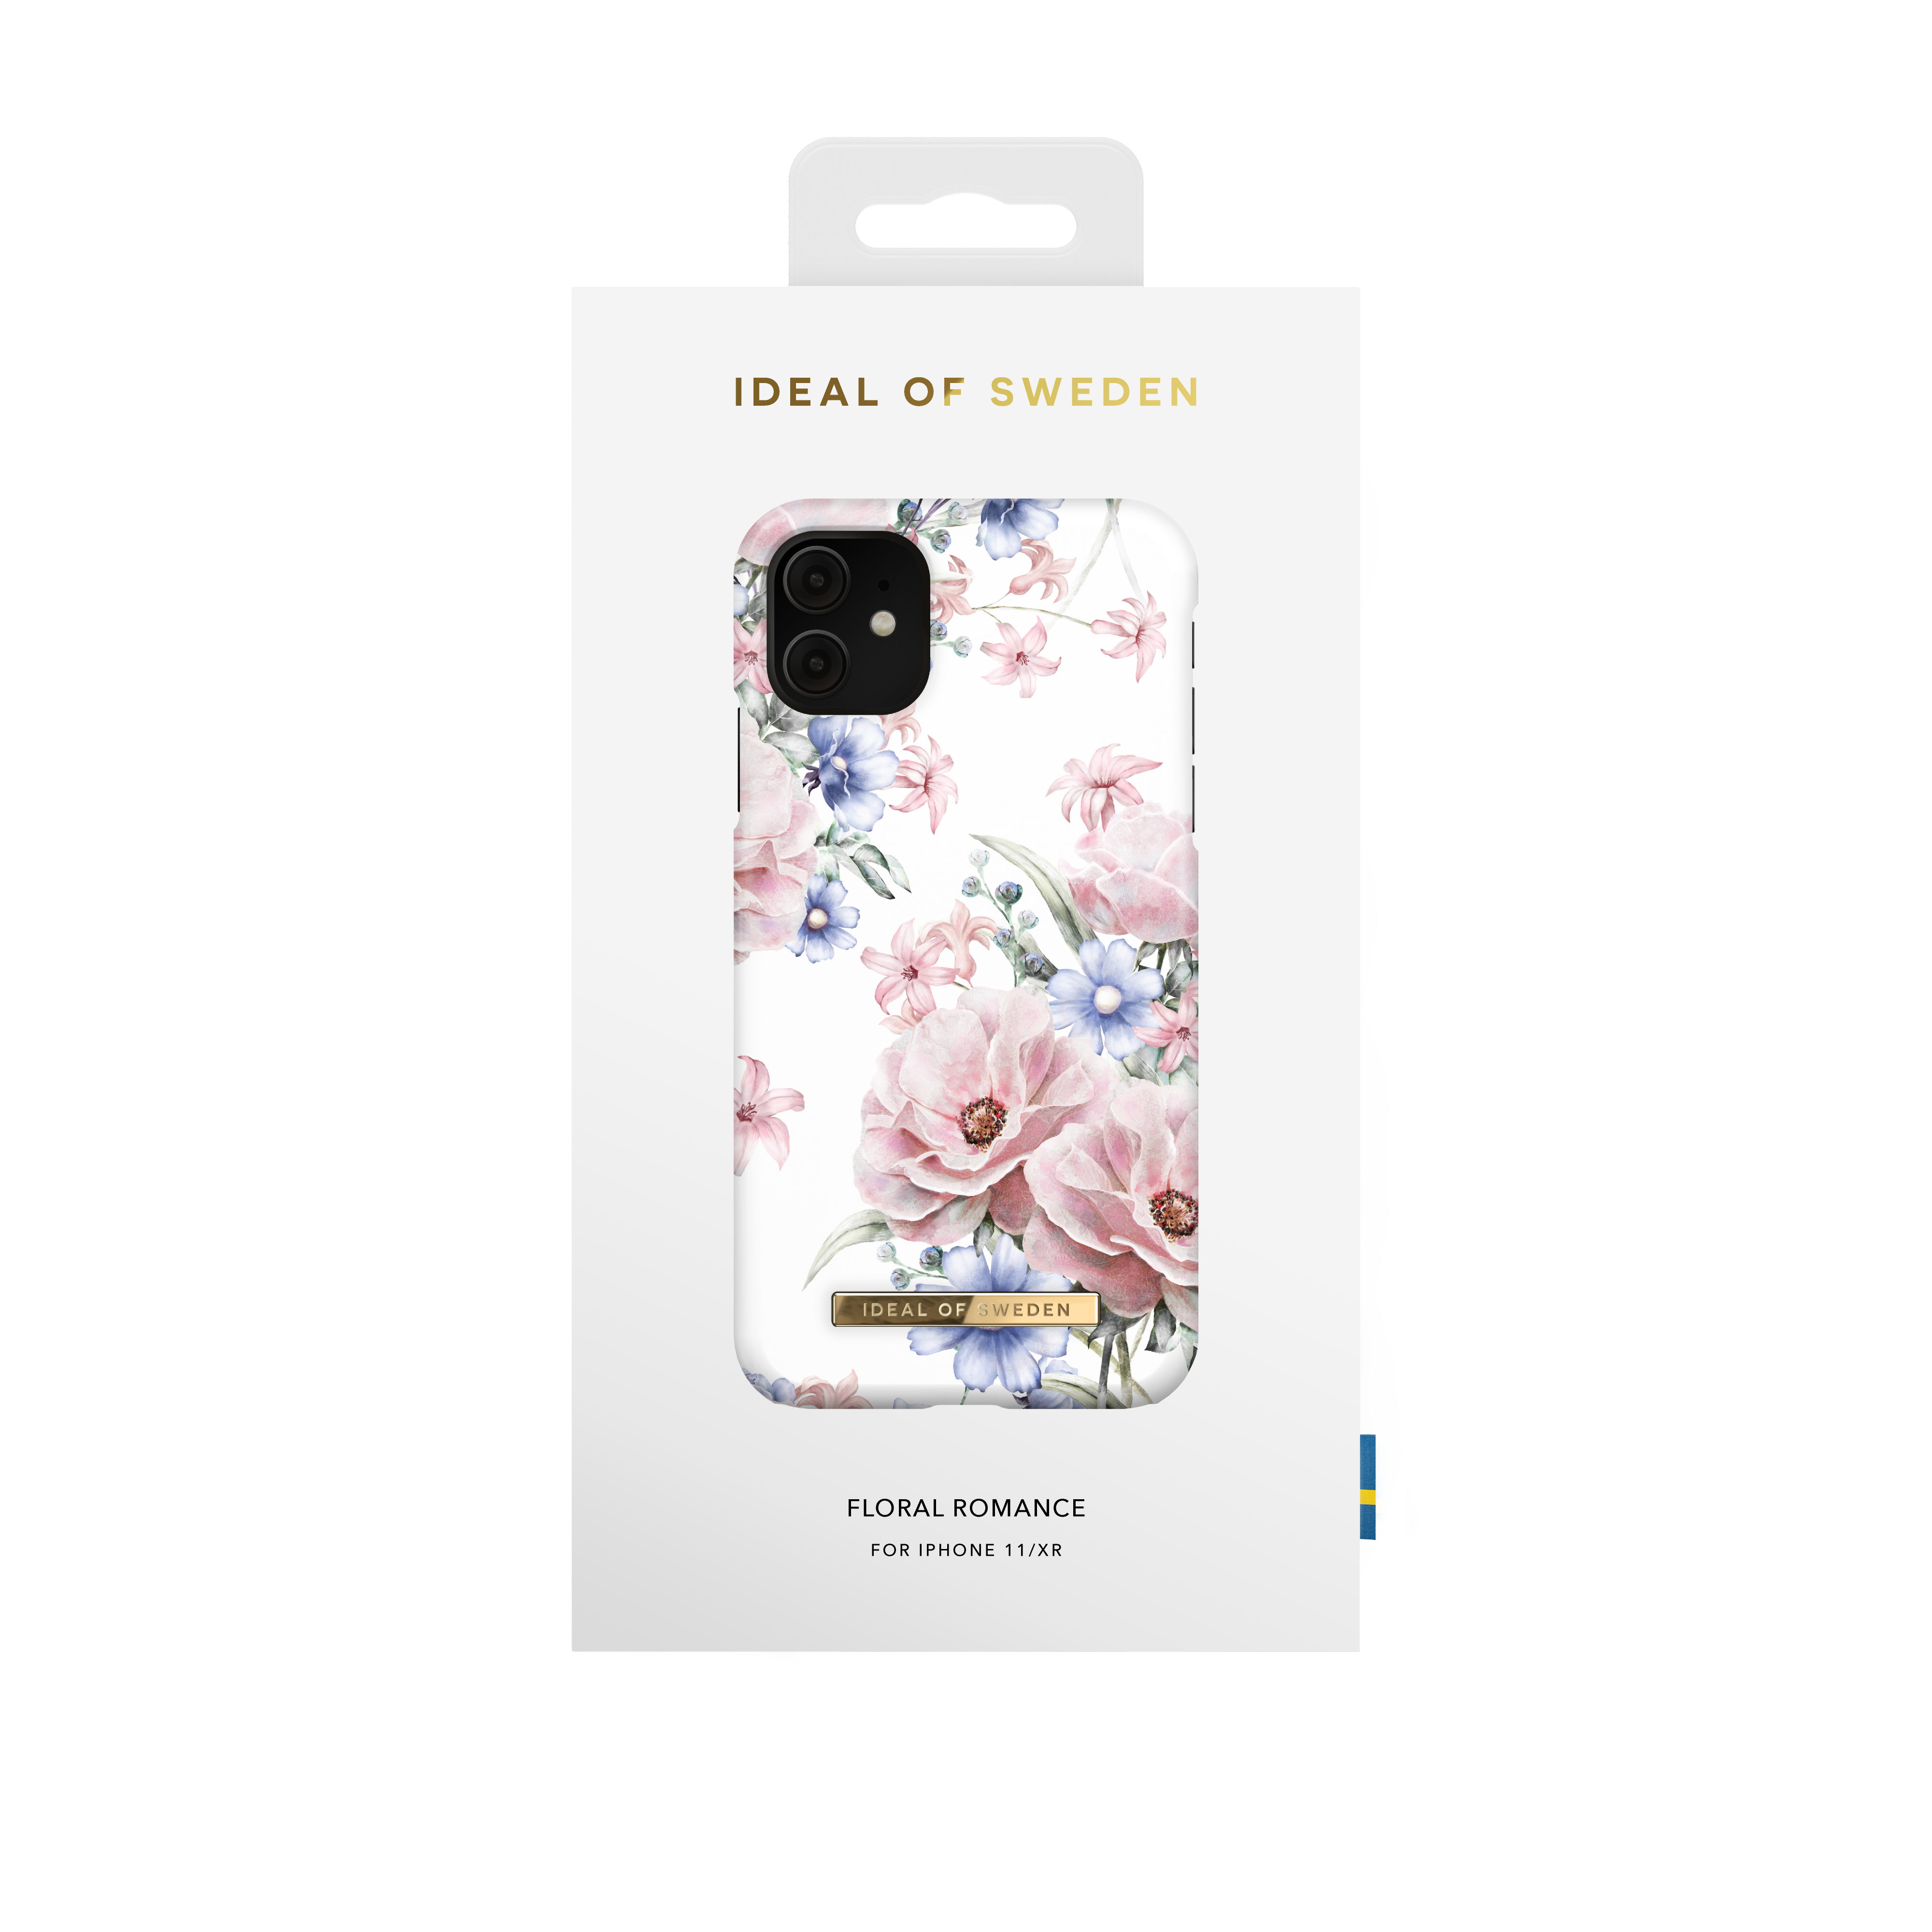 IDEAL OF SWEDEN IDFCS17-I1961-58, 11, iPhone XR, Backcover, Apple, Floral iPhone Romance